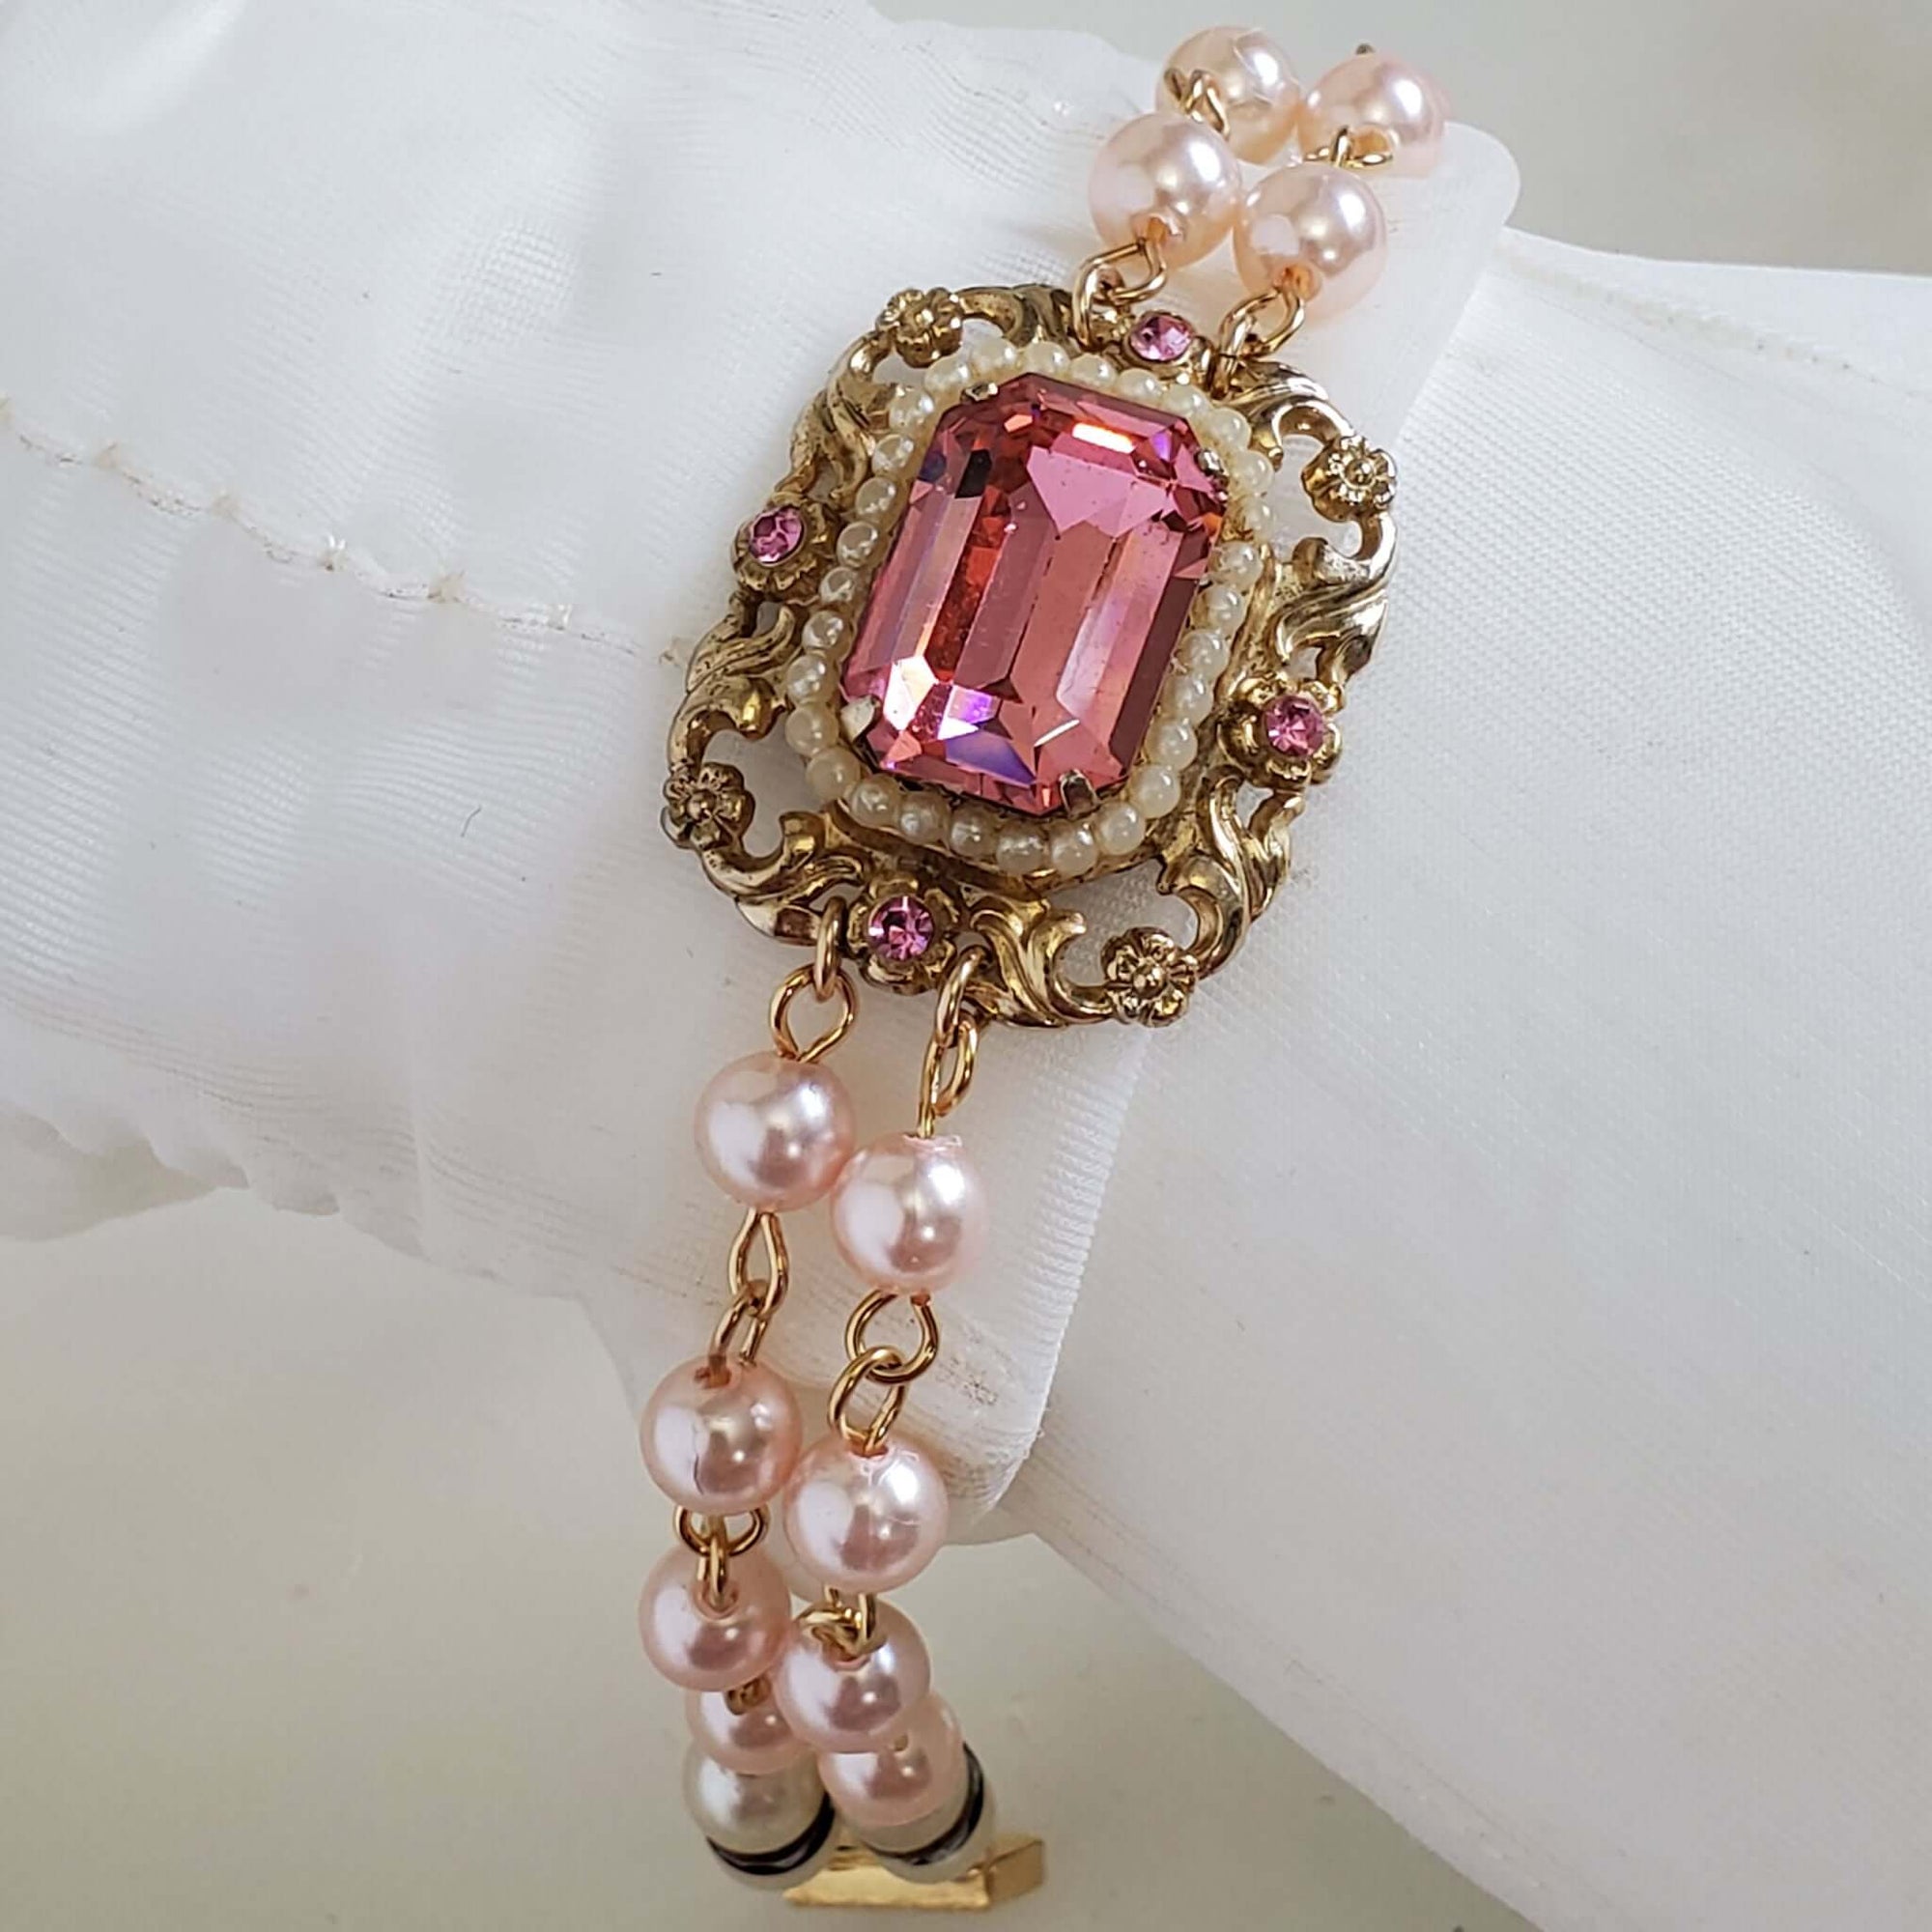 Brilliant pink vintage gemstone pendant surrounded by petite pearls.